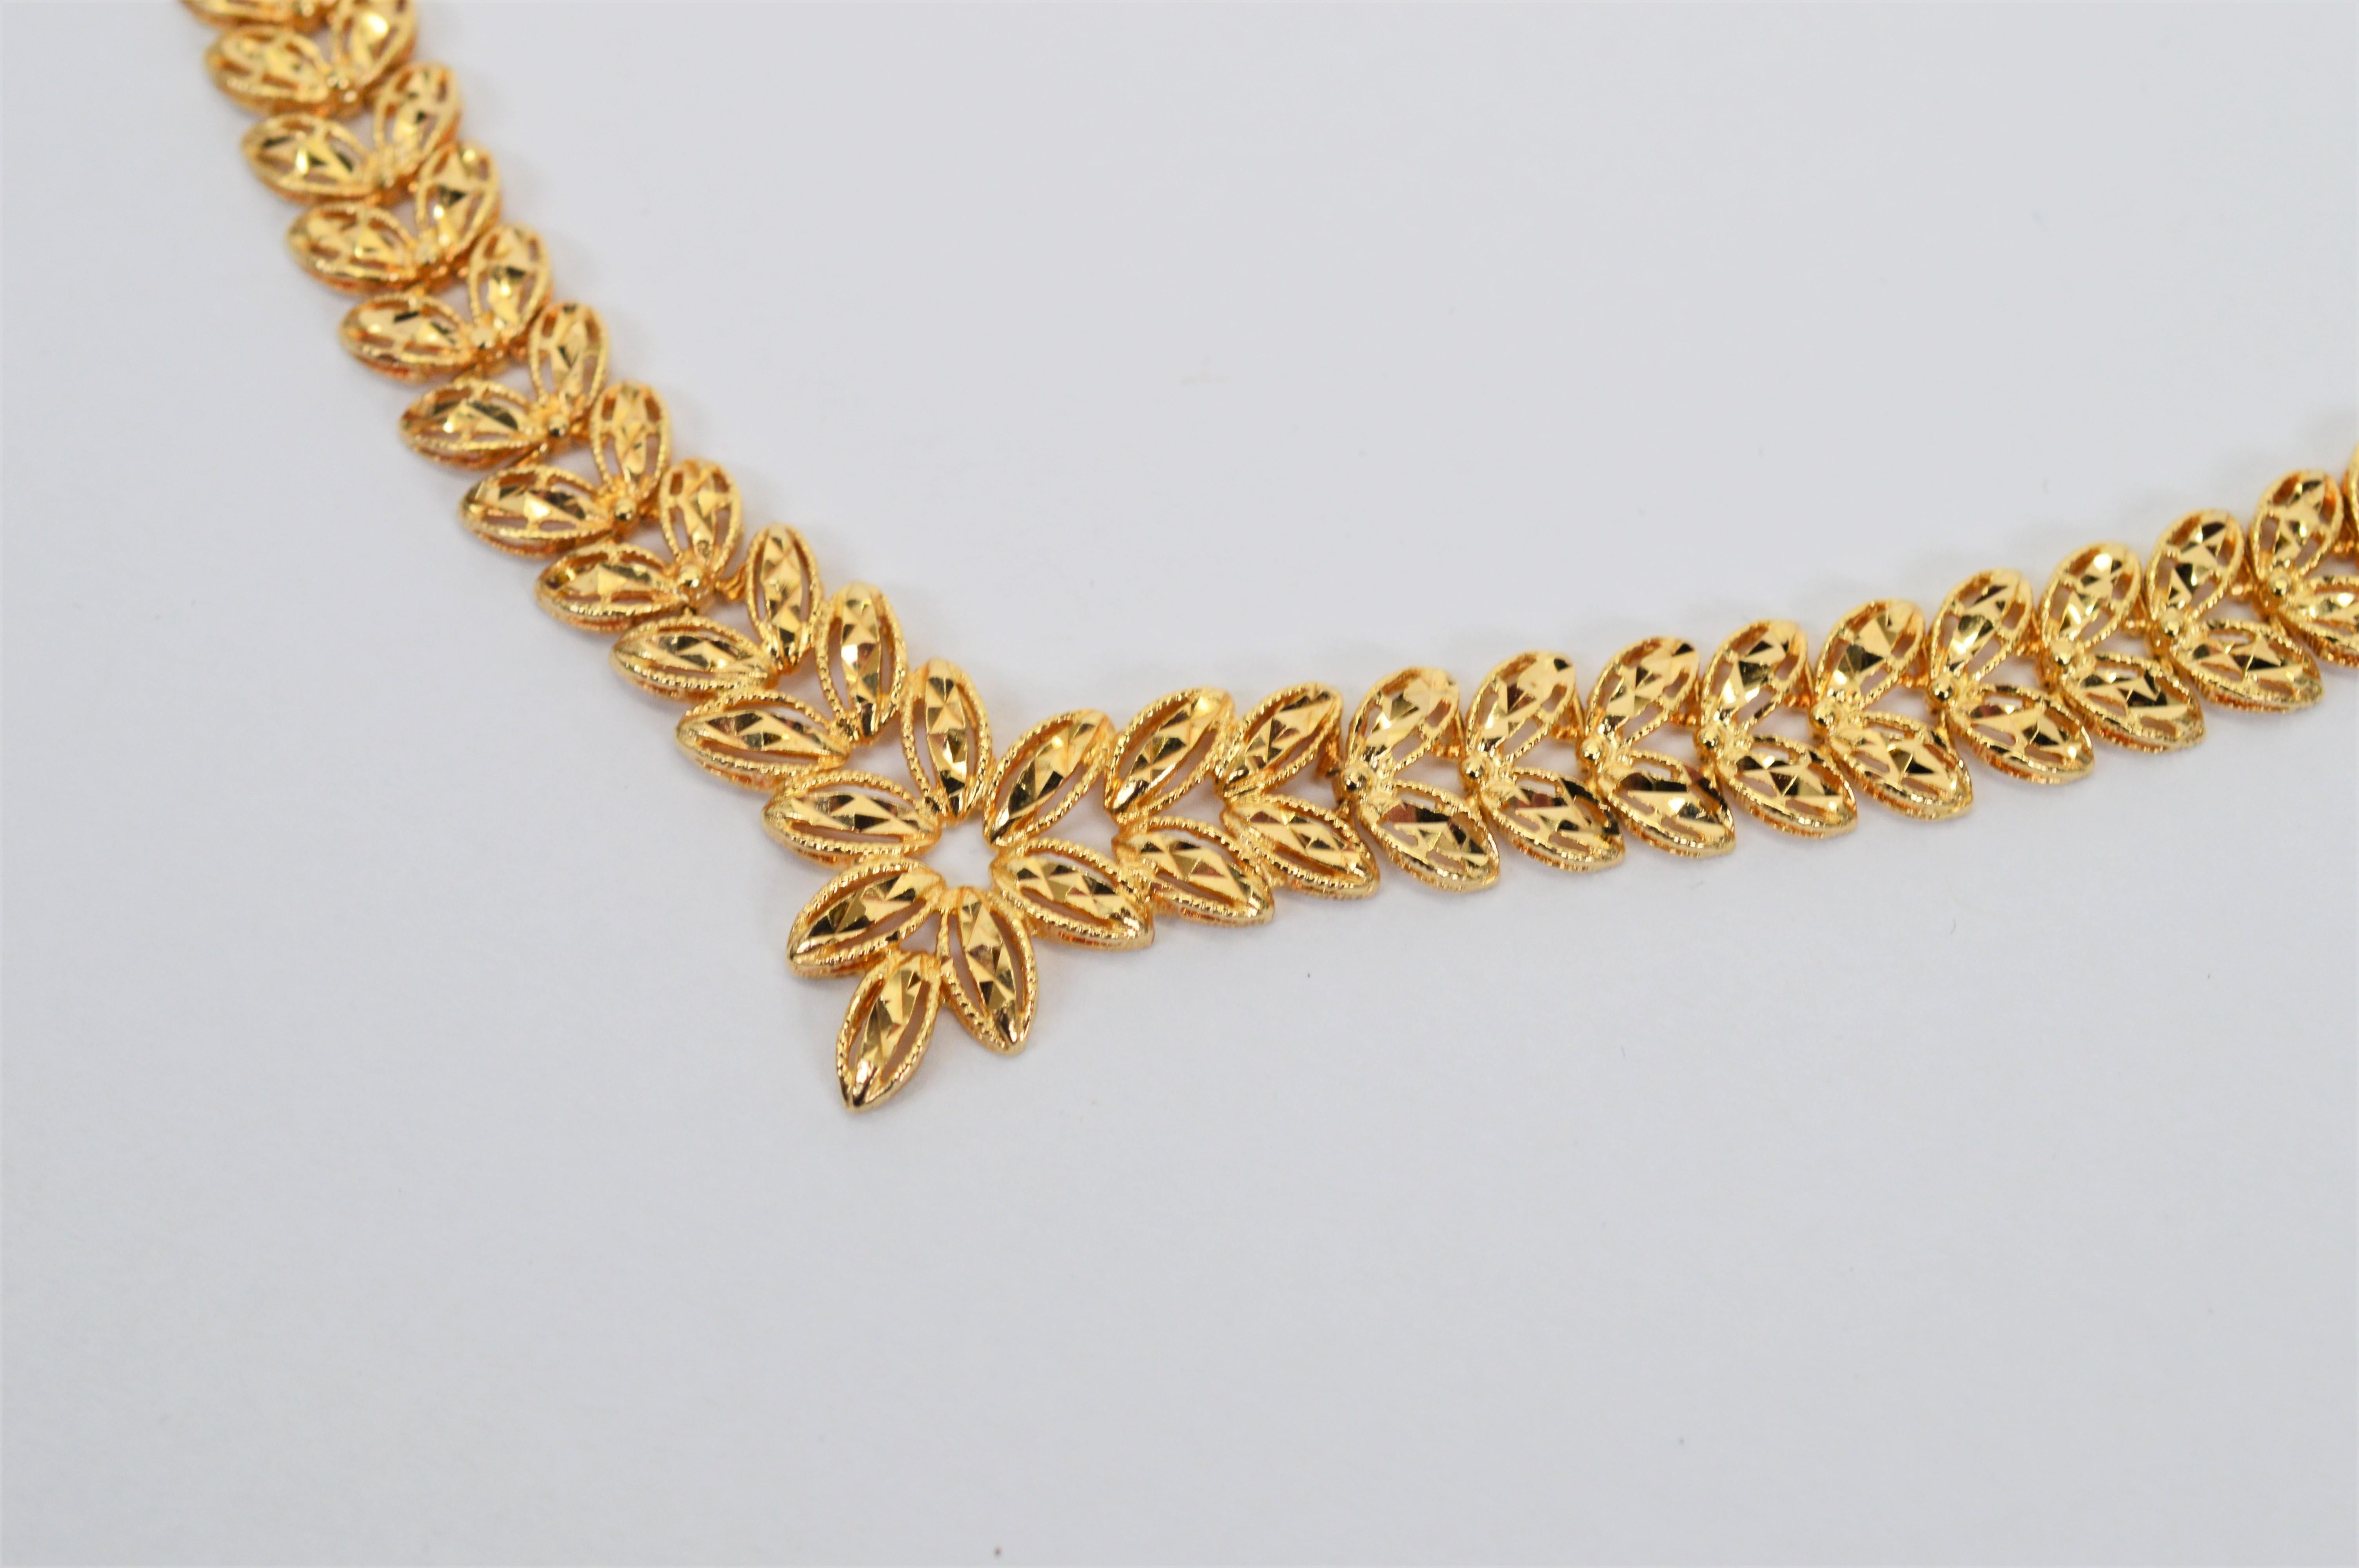 Diamond Cut 14 Karat Yellow Gold Chevron Leaf Portrait Necklace In Excellent Condition For Sale In Mount Kisco, NY